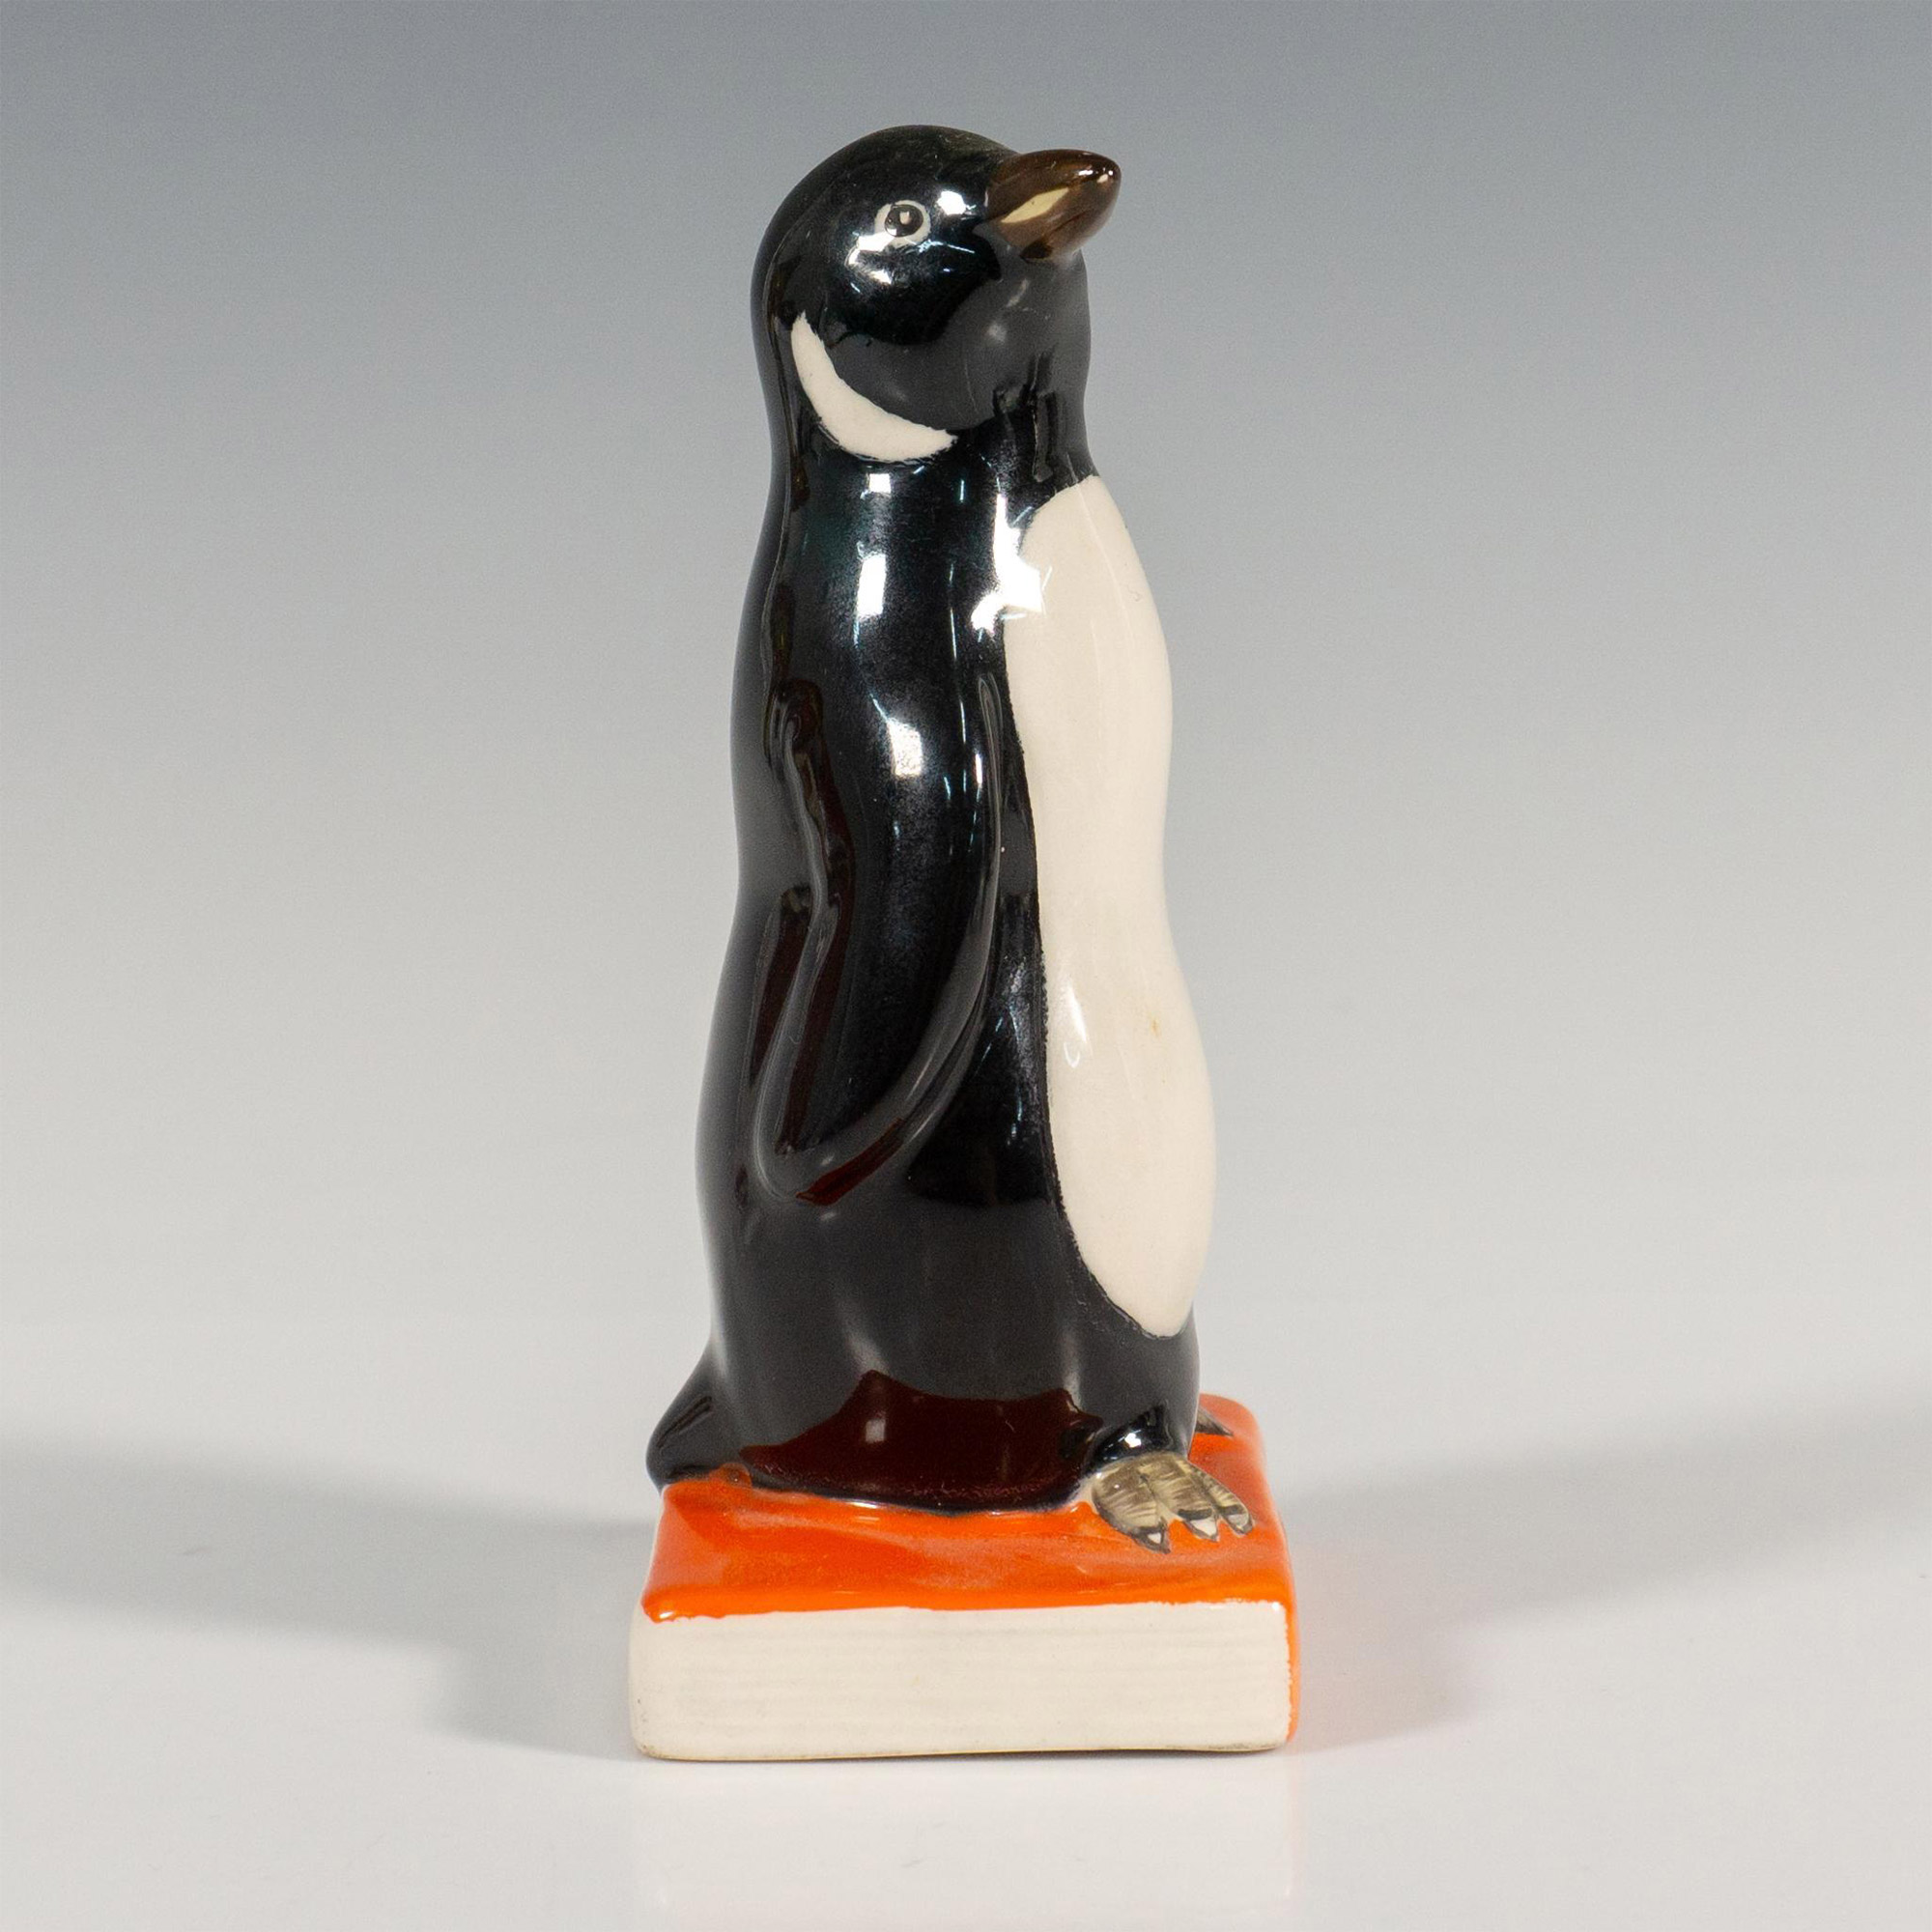 Best Wishes Penguin - Royal Doulton Advertising Figurine - Image 4 of 5